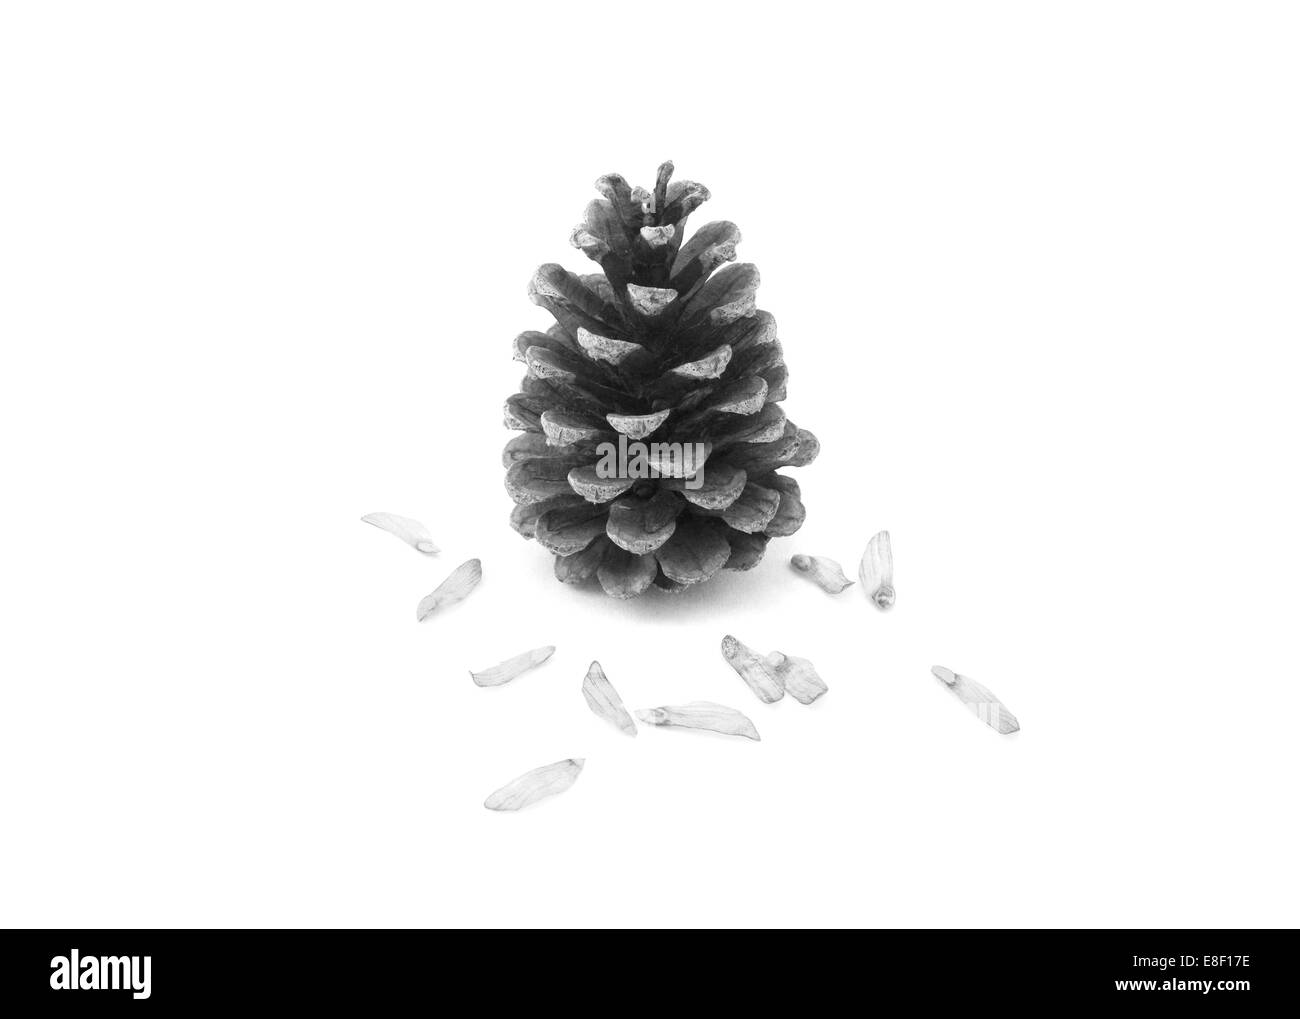 Large fir cone surrounded by delicate seeds, isolated on a white background - monochrome processing Stock Photo